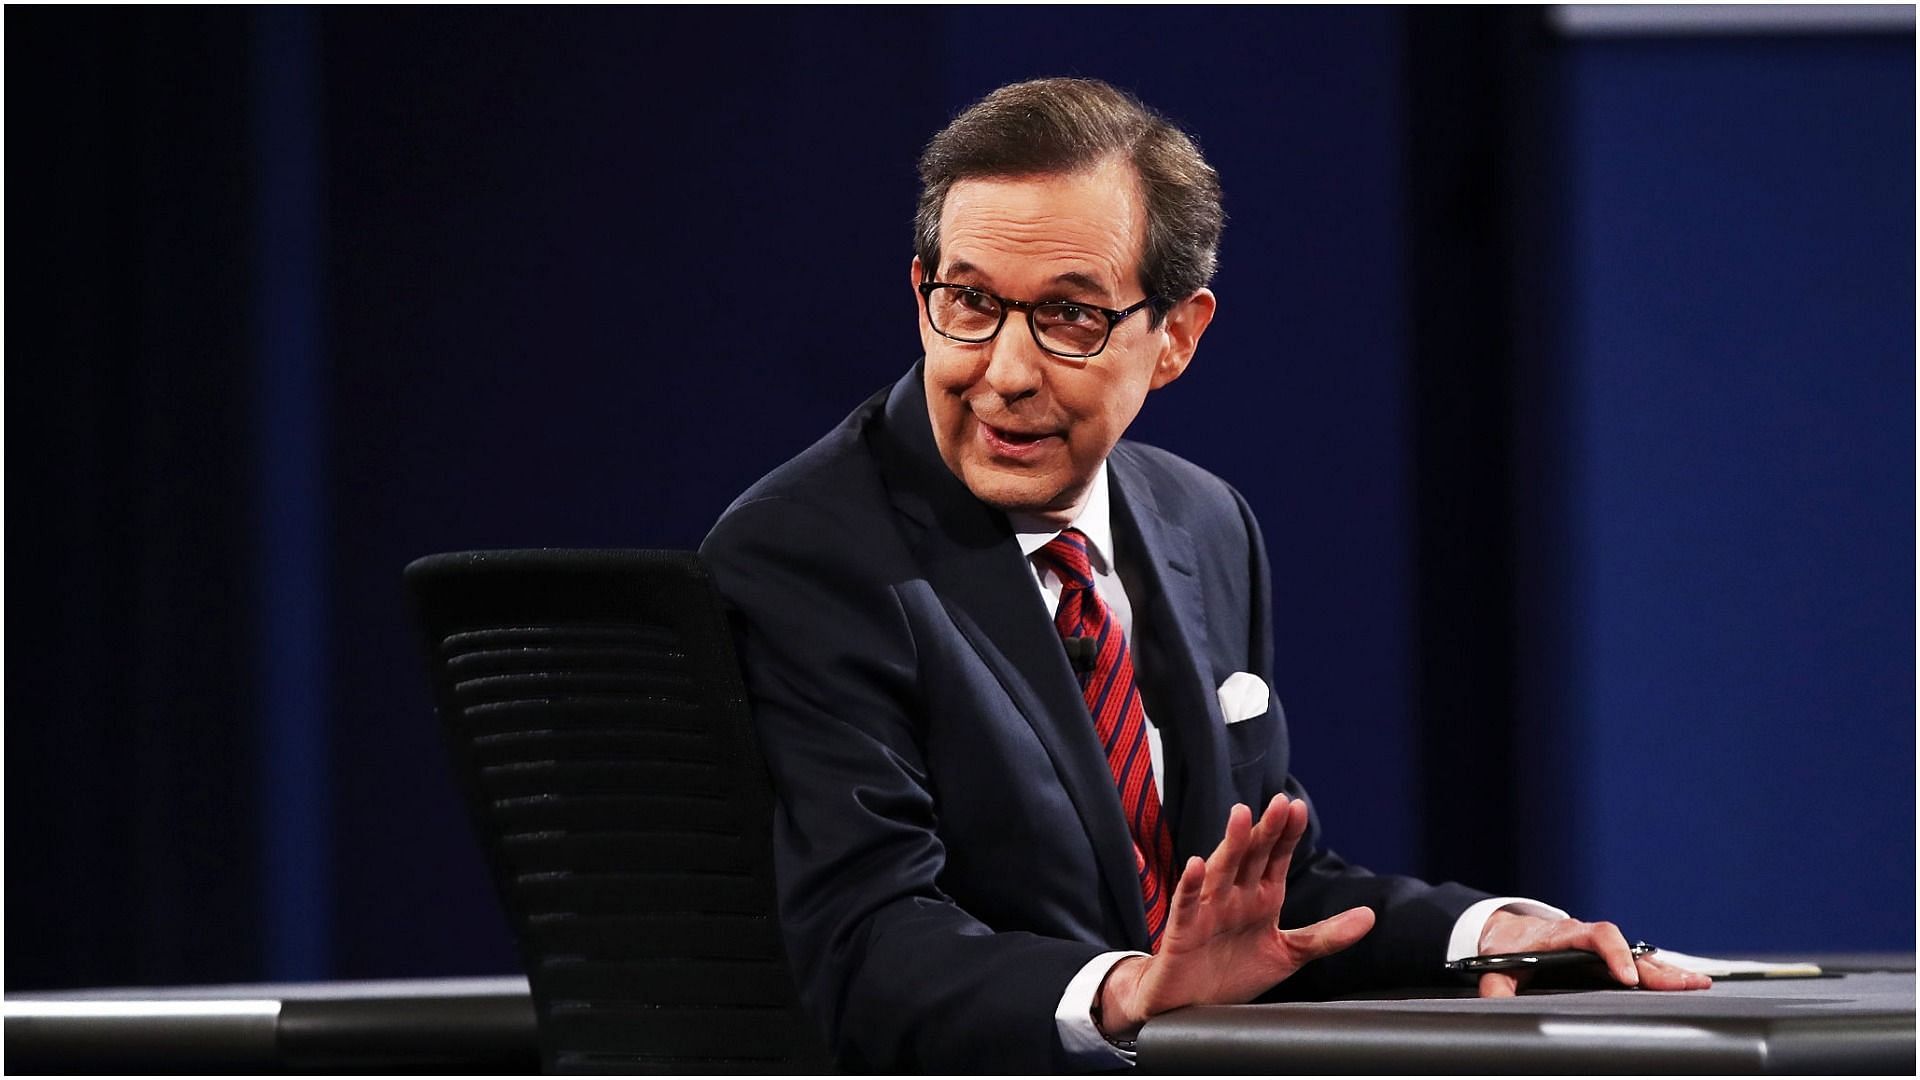 Chris Wallace speaks to the guests and attendees during the third U.S. presidential debate at the Thomas &amp; Mack Center (Image by Win McNamee via Getty Images)